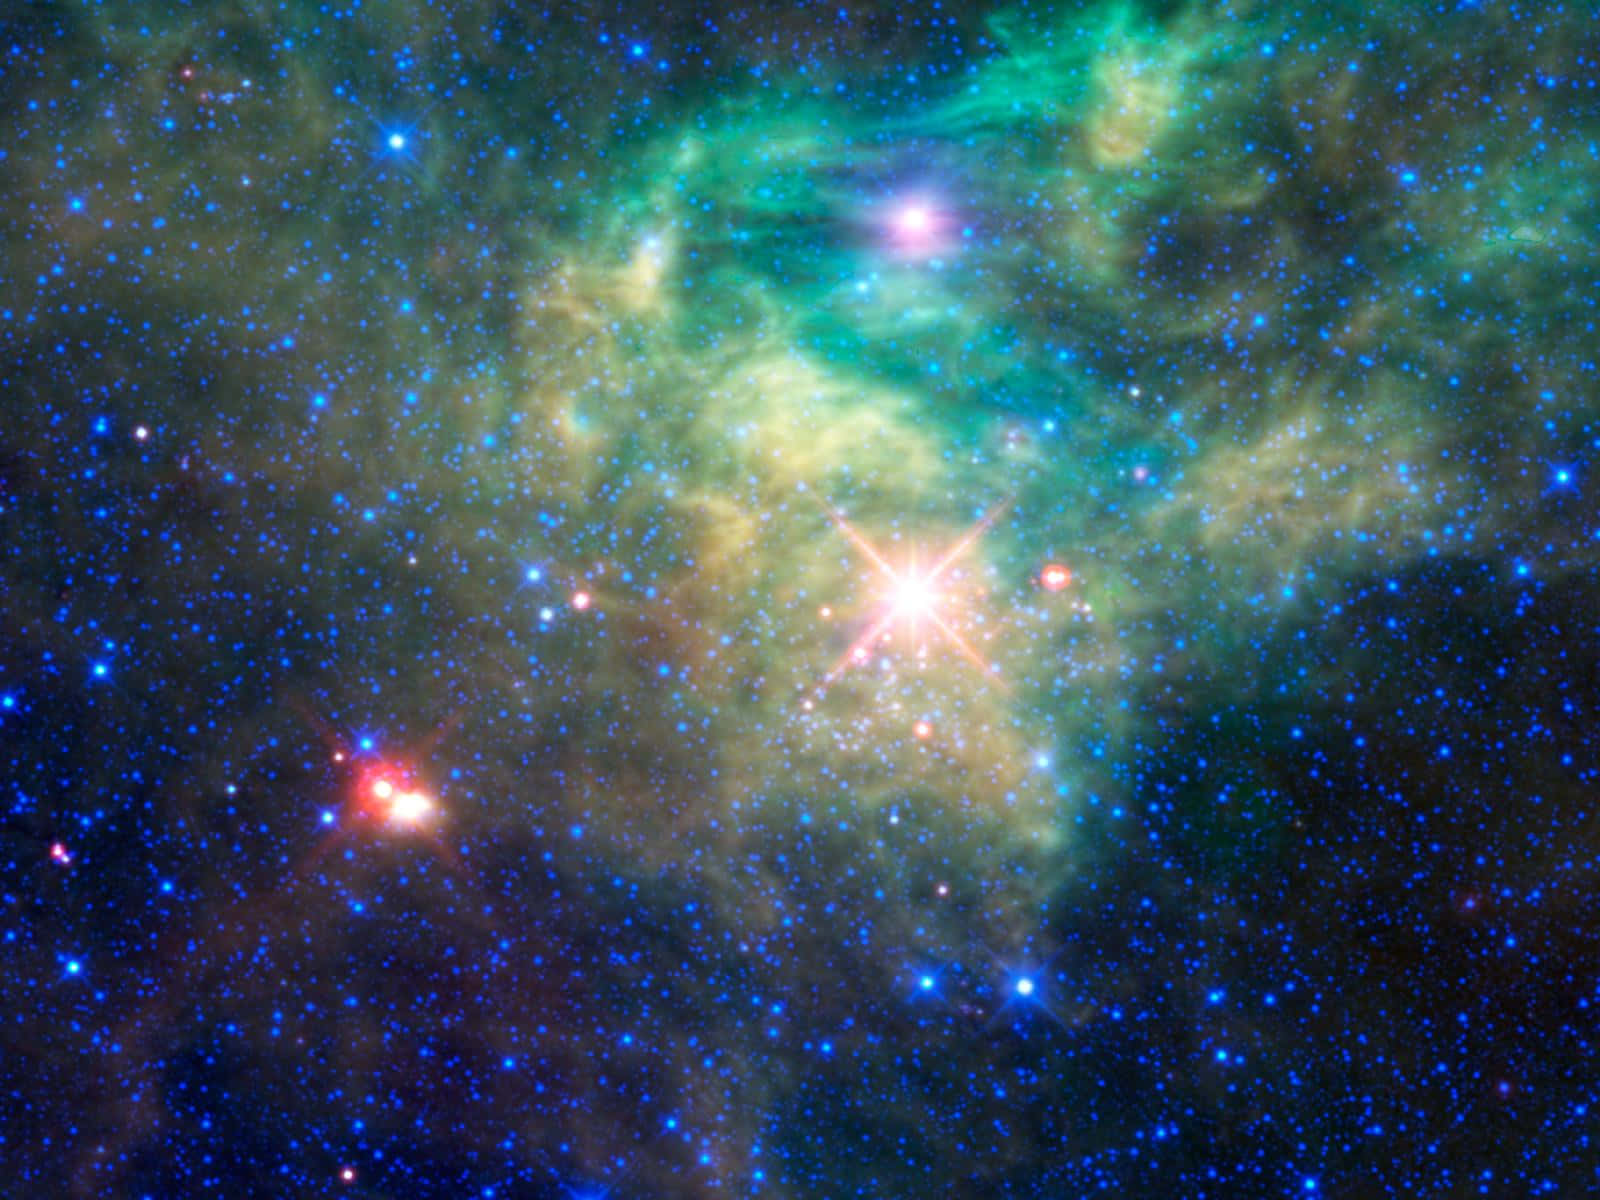 Caption: Stunning Star Cluster in Deep Space Wallpaper